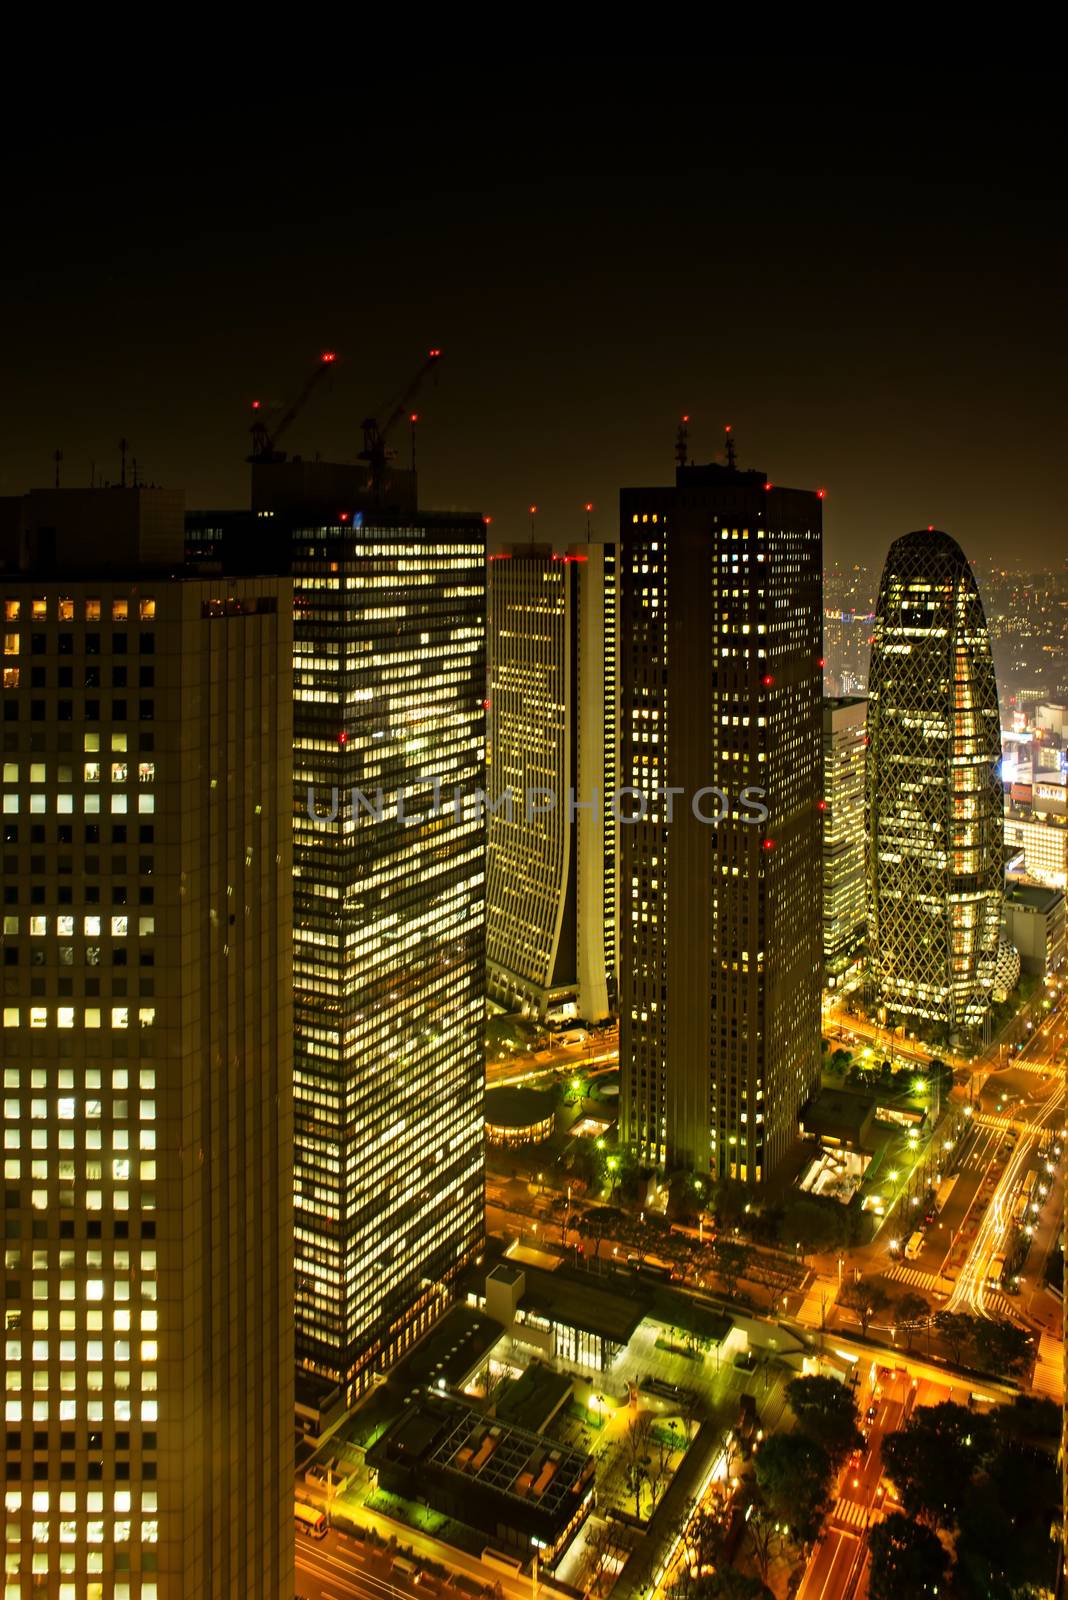  from free observator of Tokyo Metroplitan Government building by Yuri2012